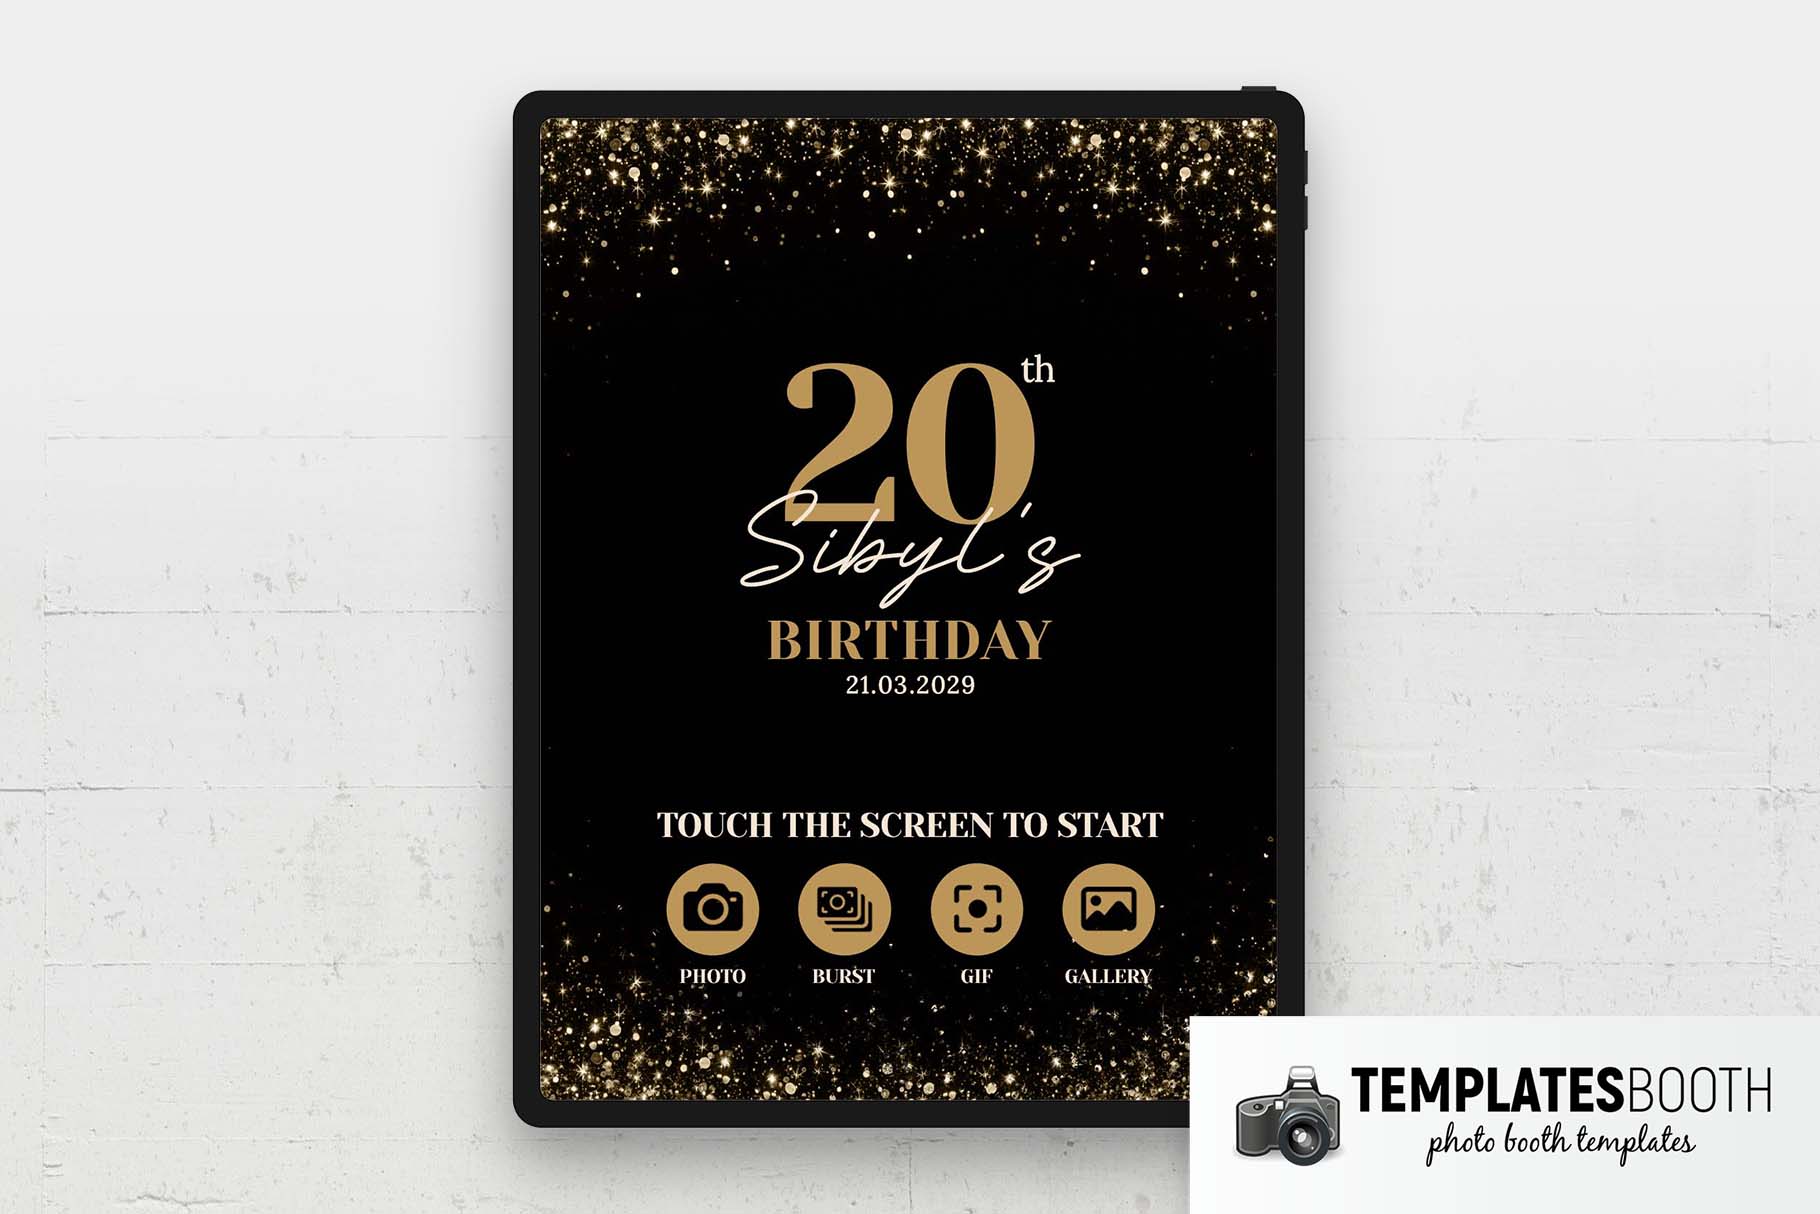 20th Birthday Photo Booth Welcome Screen